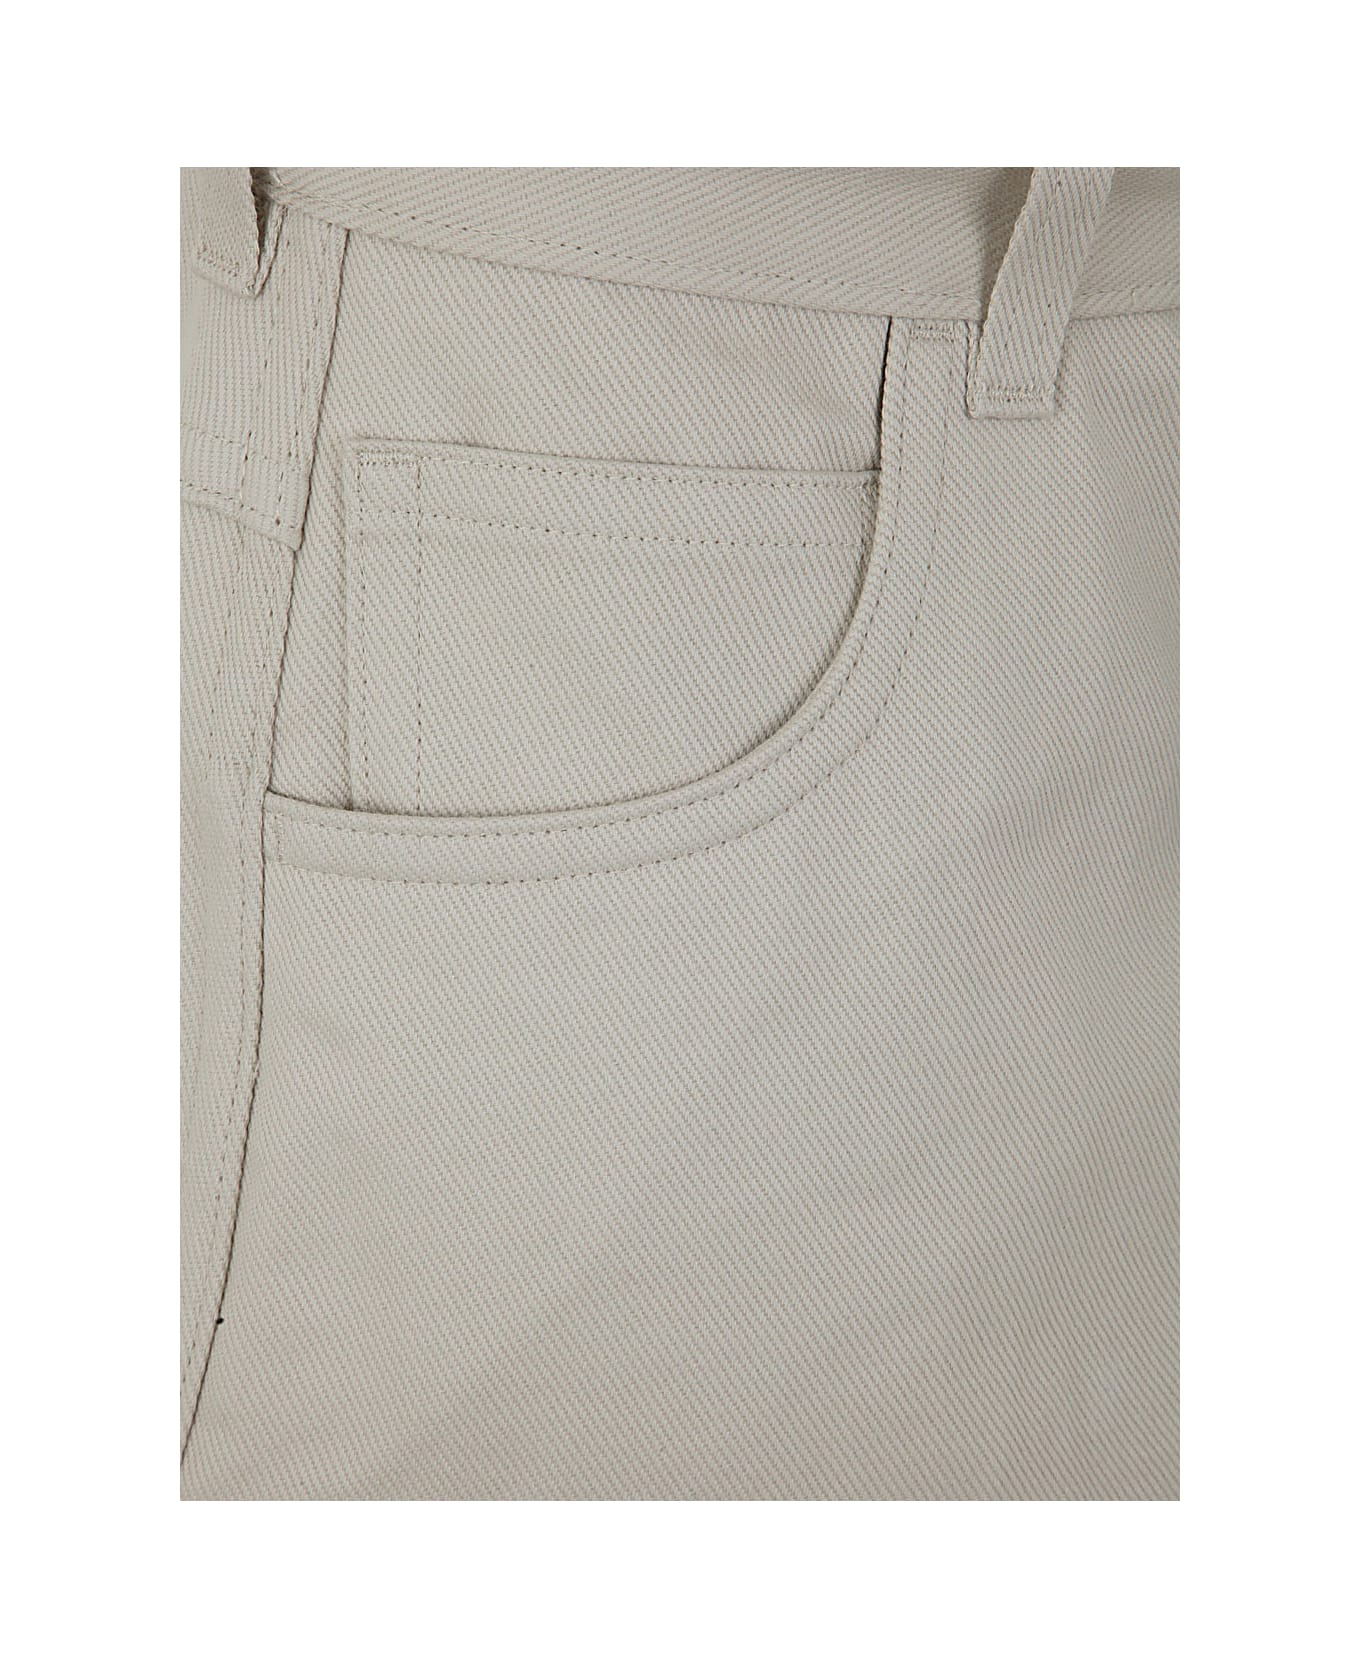 Sofie d'Hoore 5-pockets Jeans - Pearl ボトムス